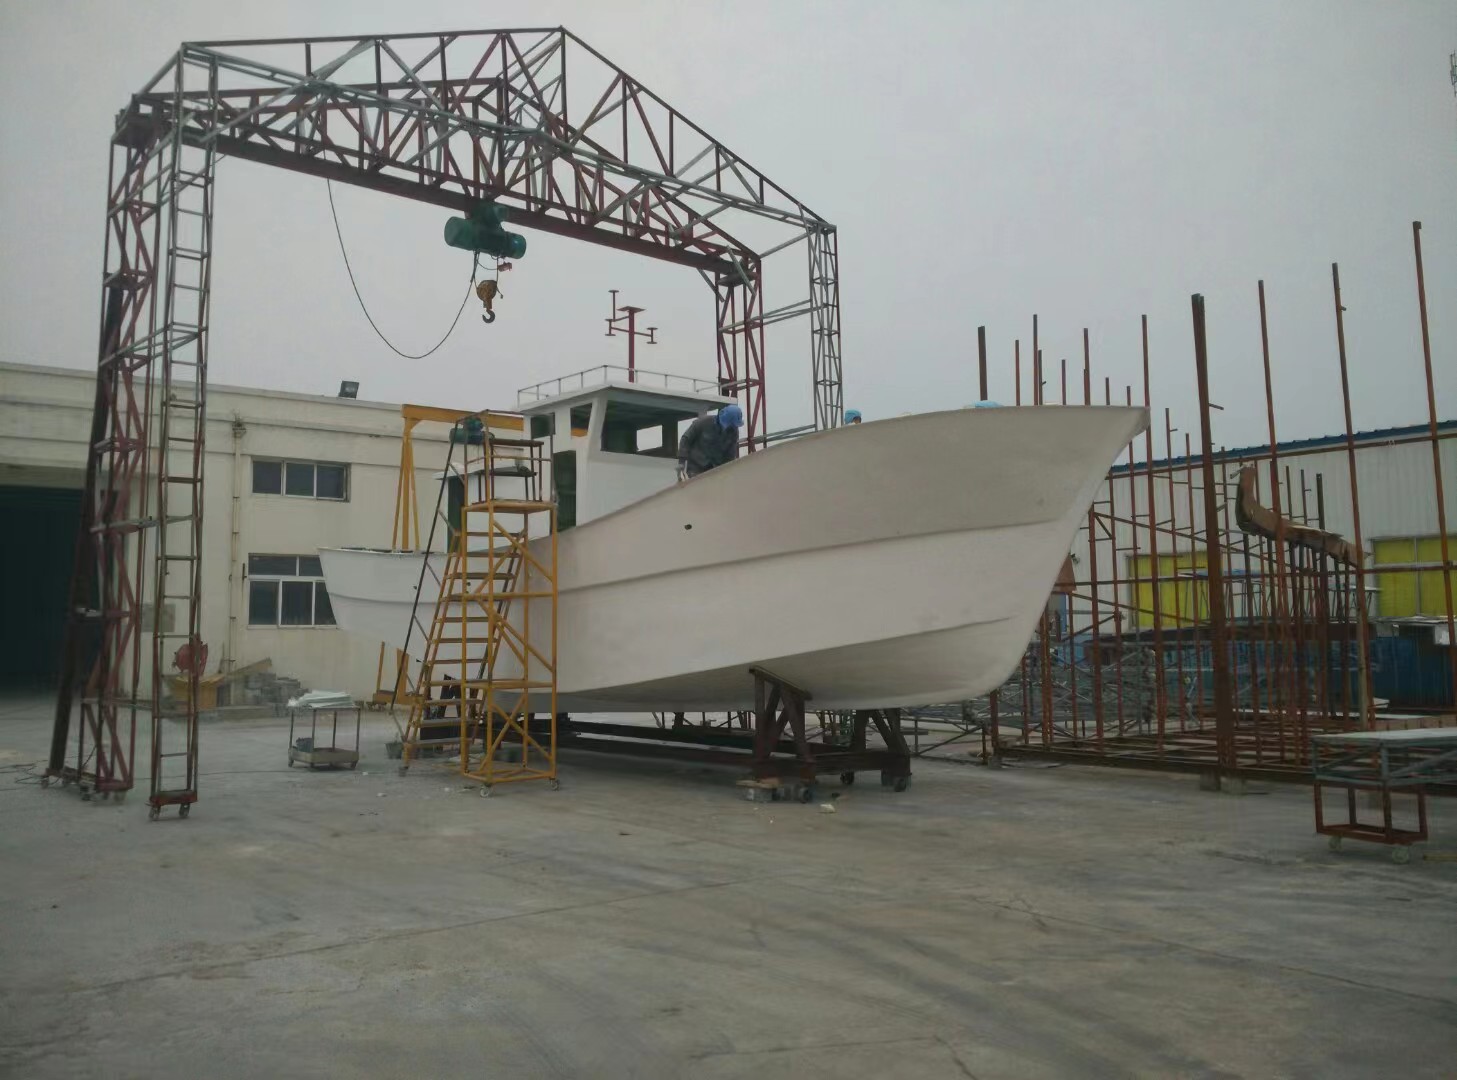 Commercial Reliable Round Fishing Boat